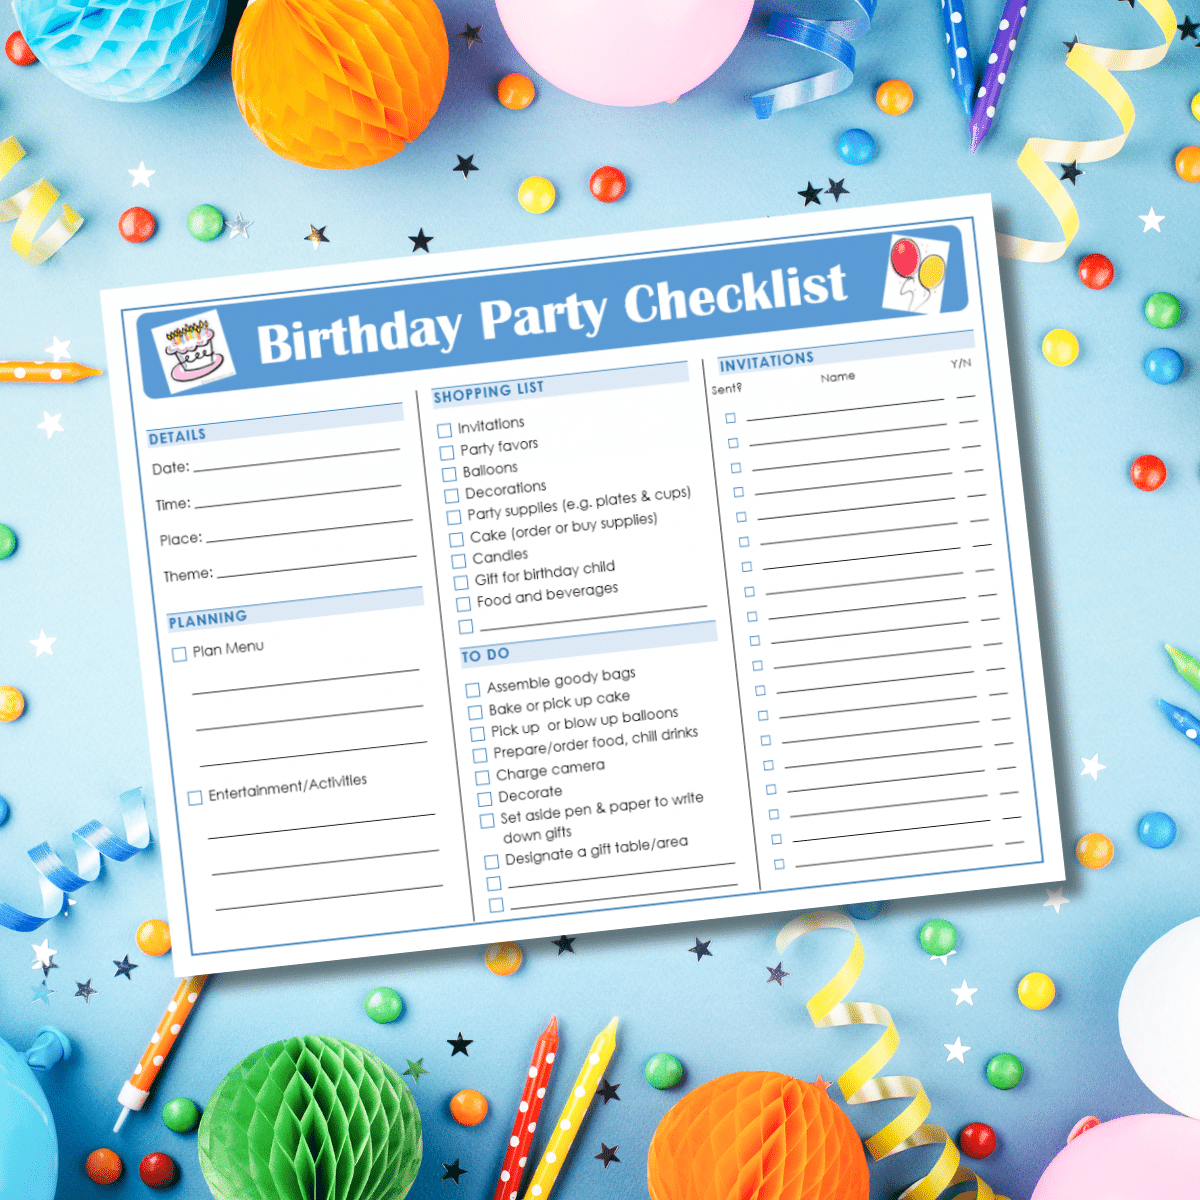 A free printable birthday party checklist featuring balloons and confetti.